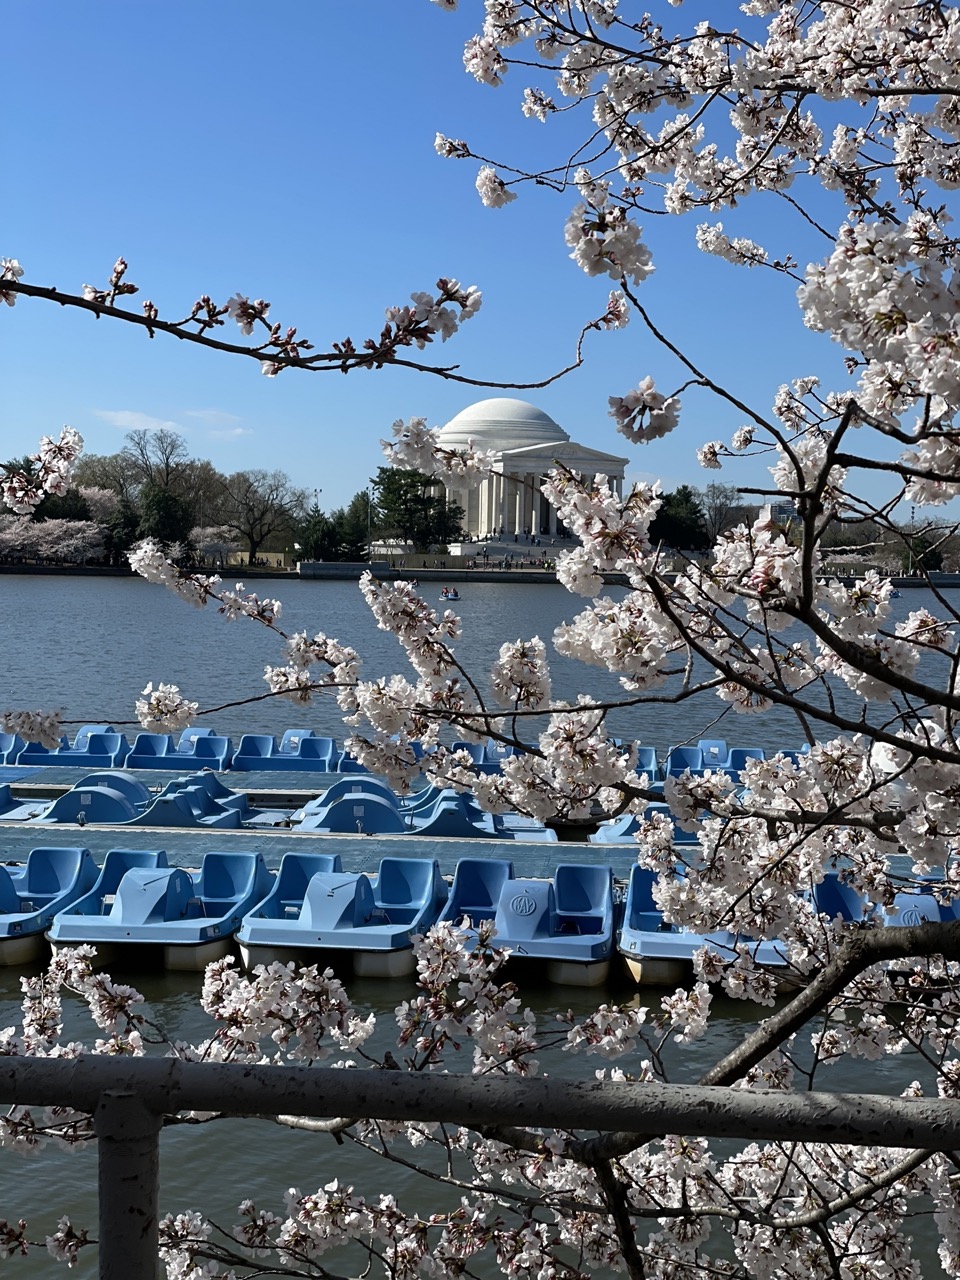 Memorial and water boats through cherry blossoms